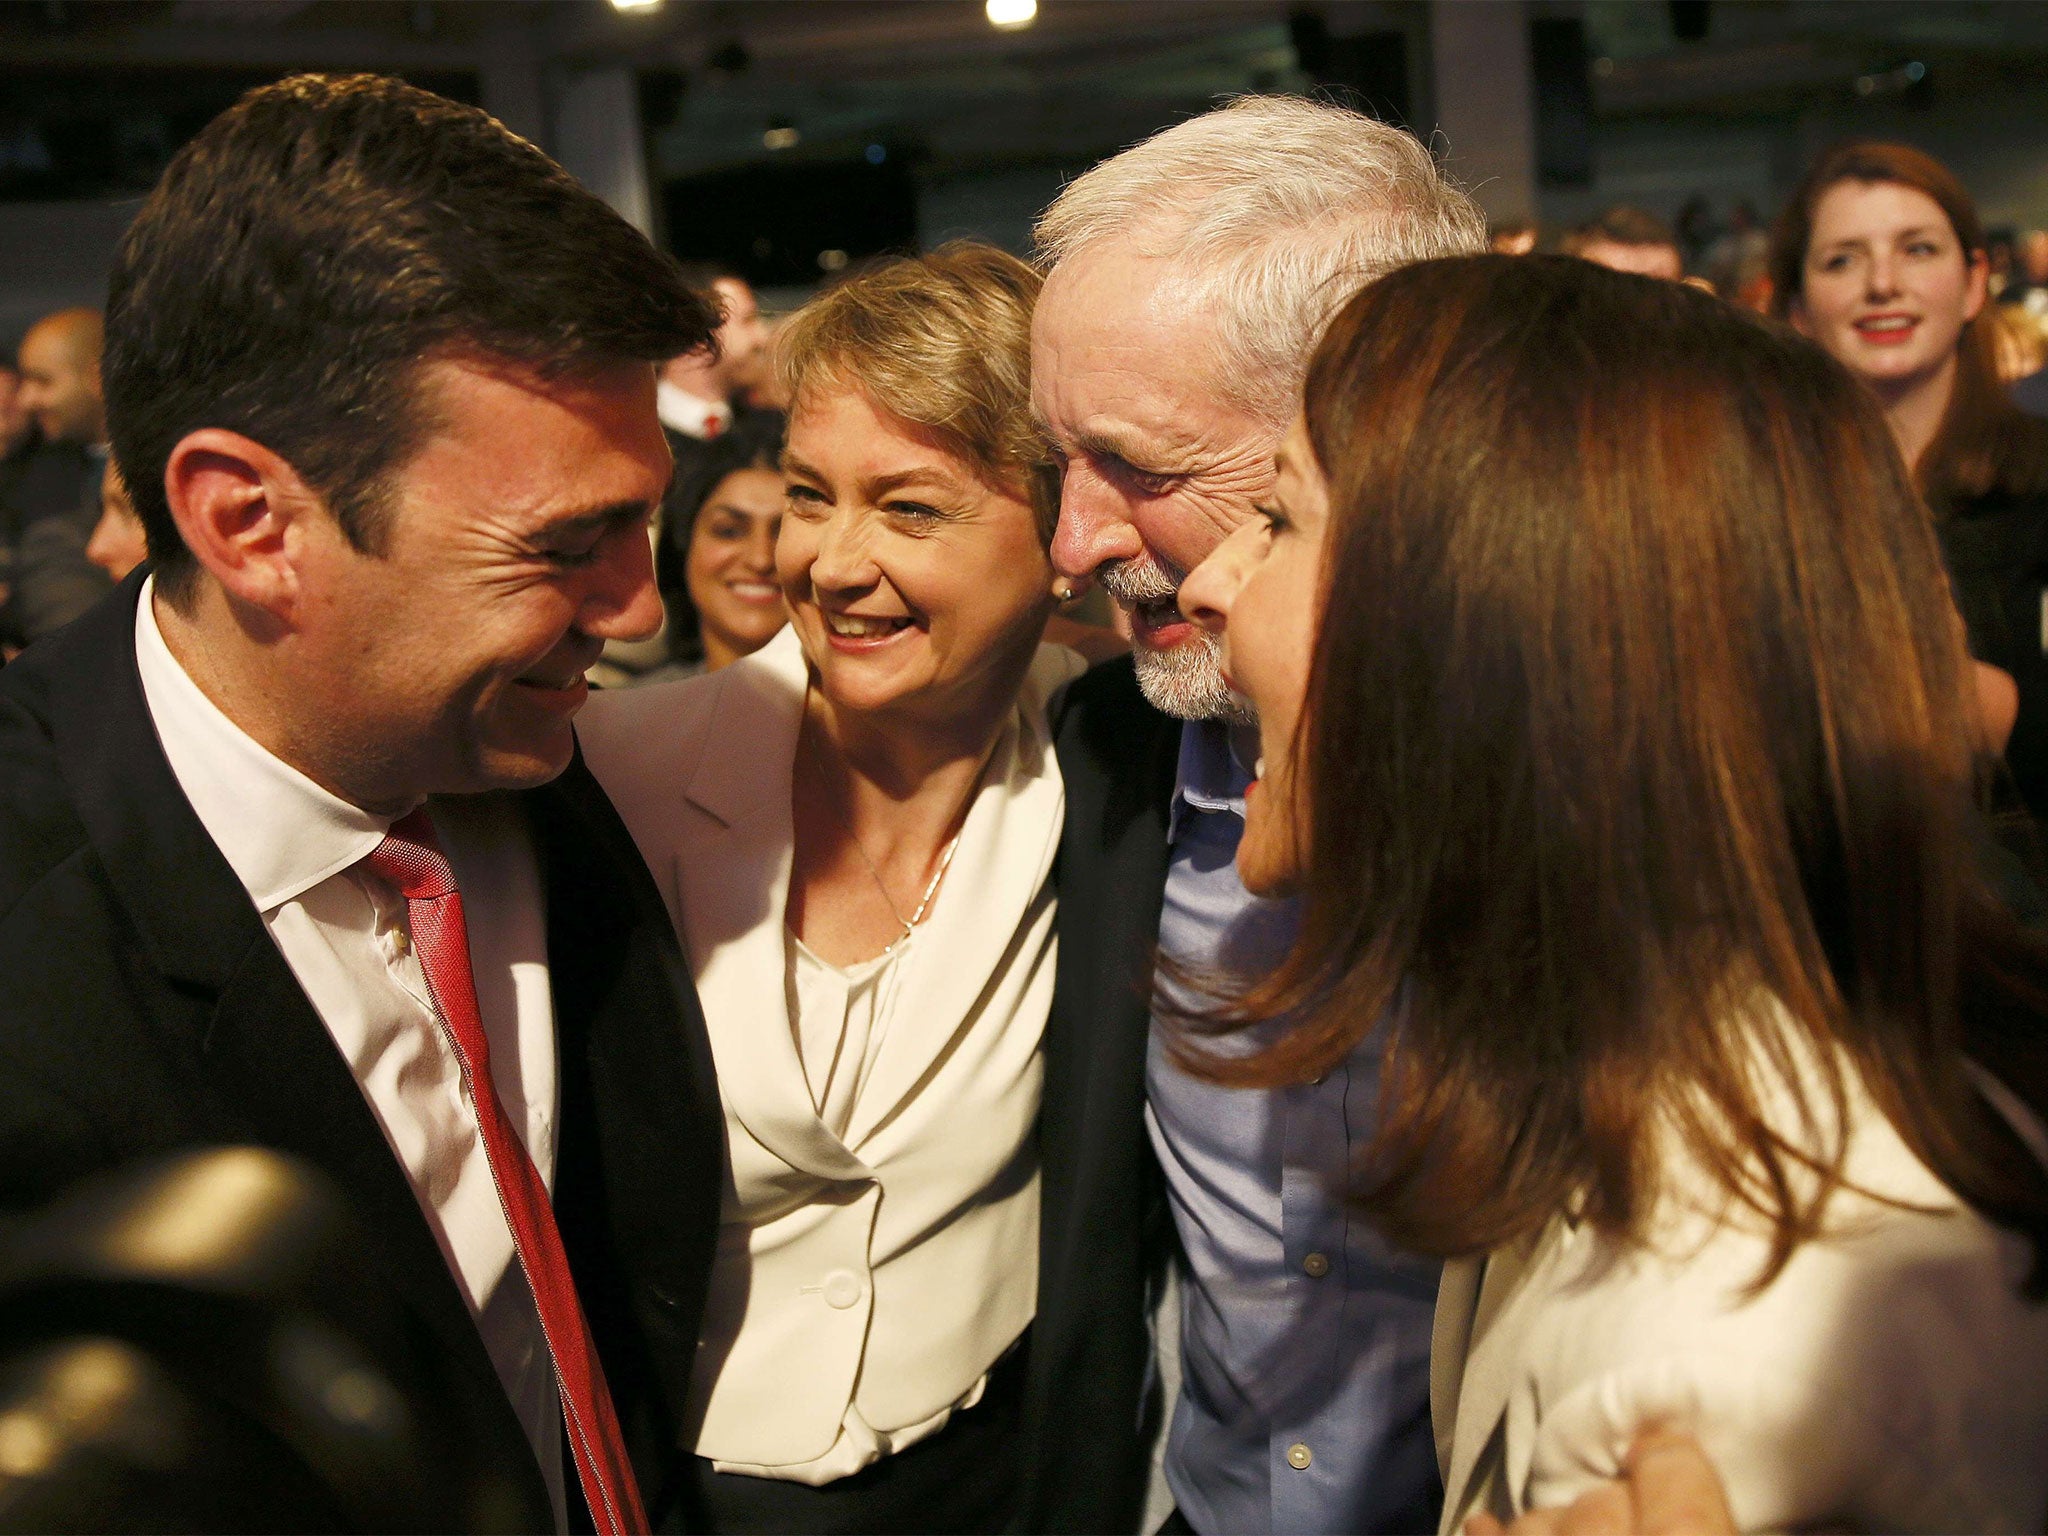 Andy Burnham, Yvette Cooper and Liz Kendall congratulate Jeremy Corbyn on his victory